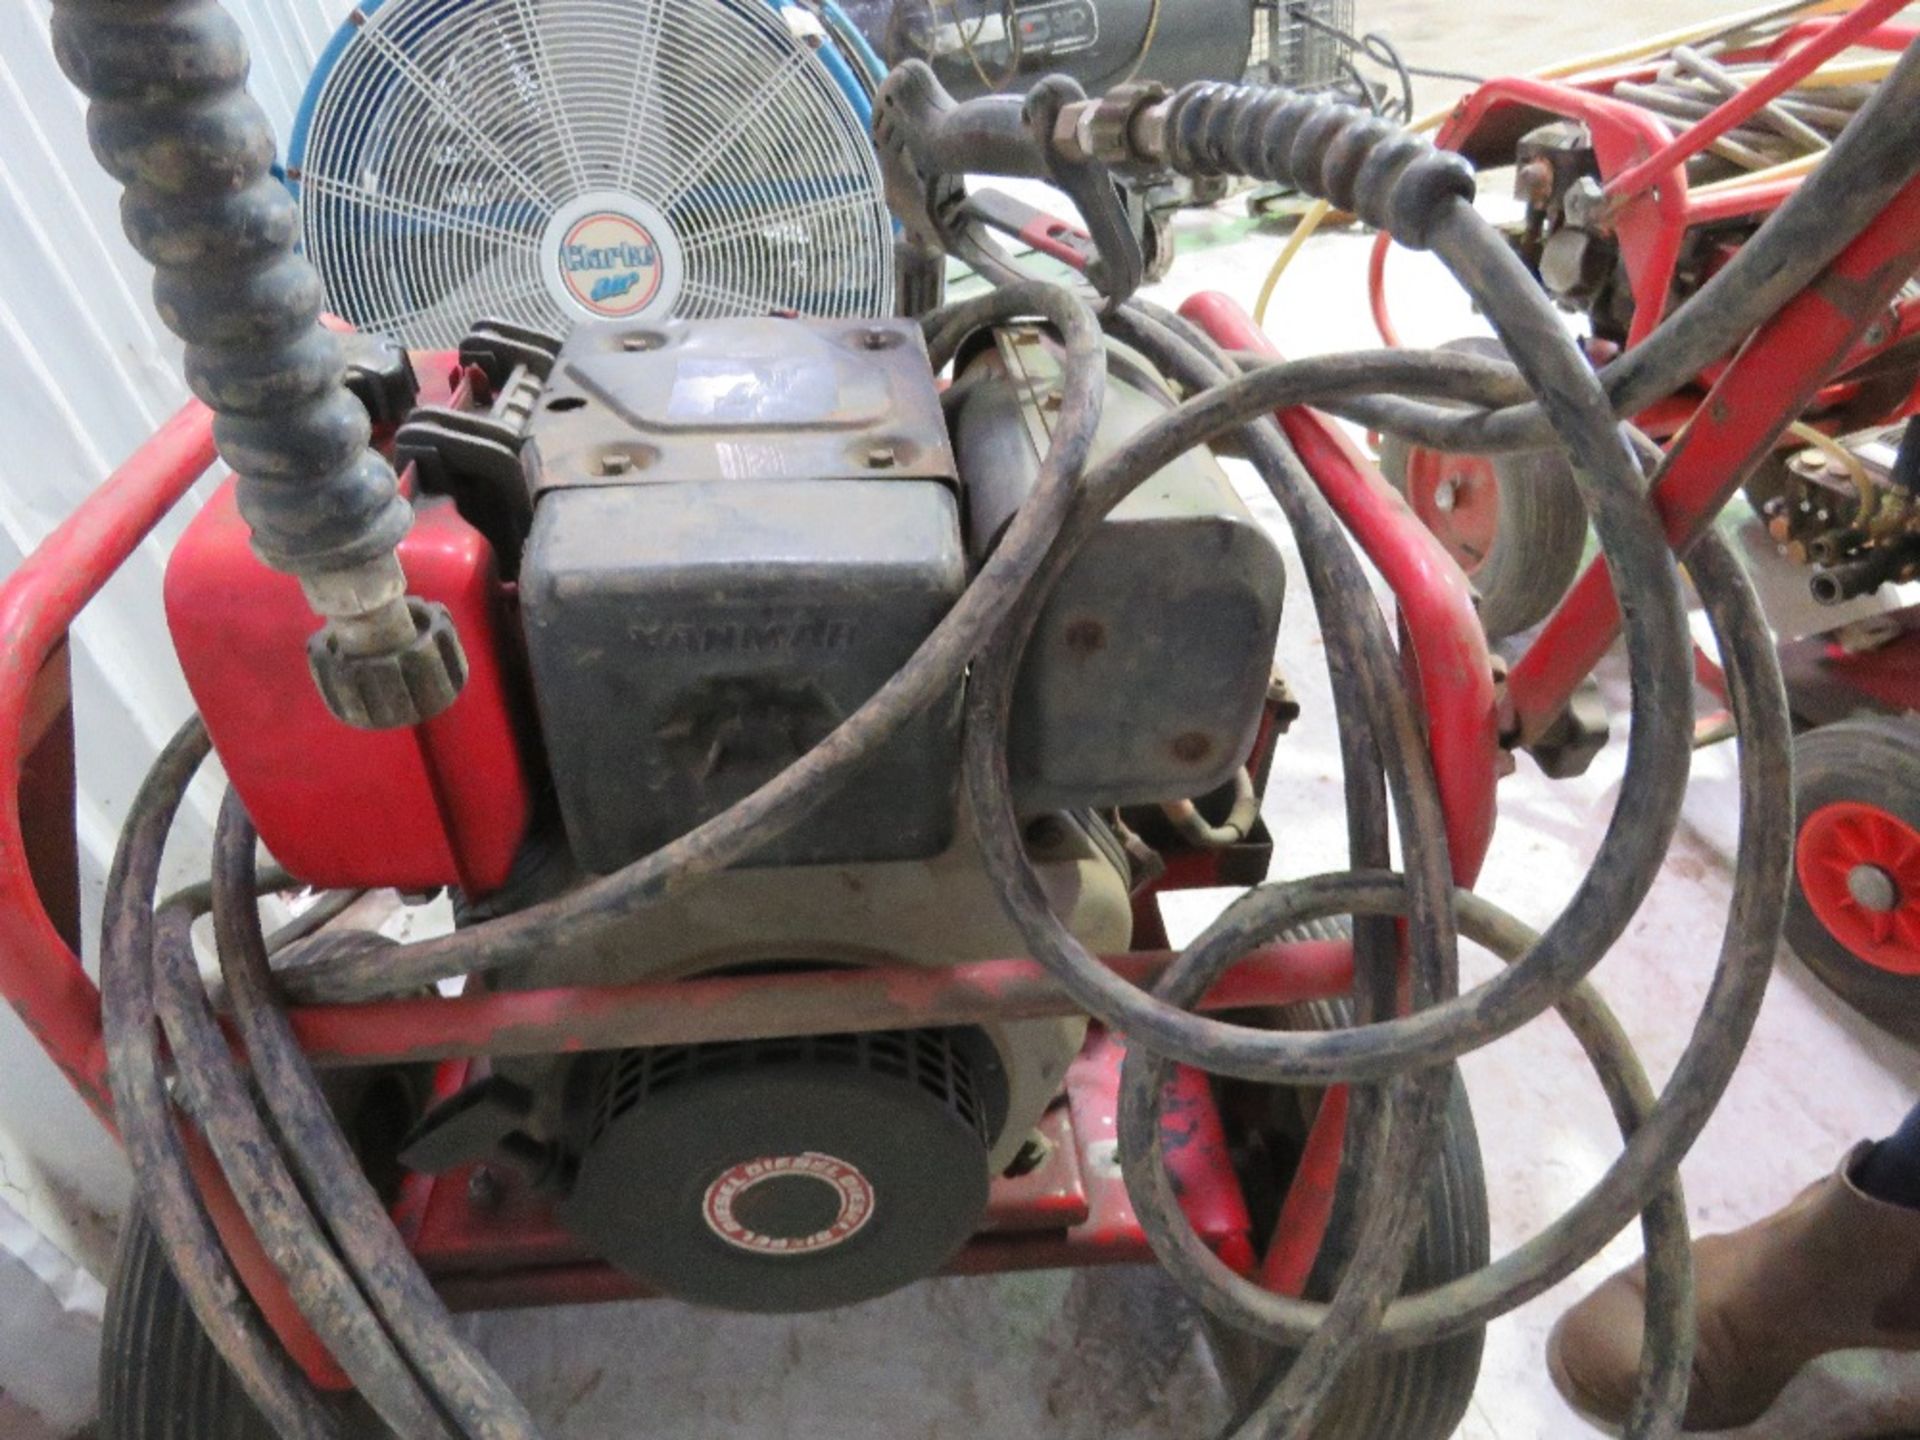 YANMAR DIESEL ENGINED PRESSURE WASHER. WHEN TESTED WAS SEEN TO START AND RUN (FUEL LOW) - Image 8 of 10